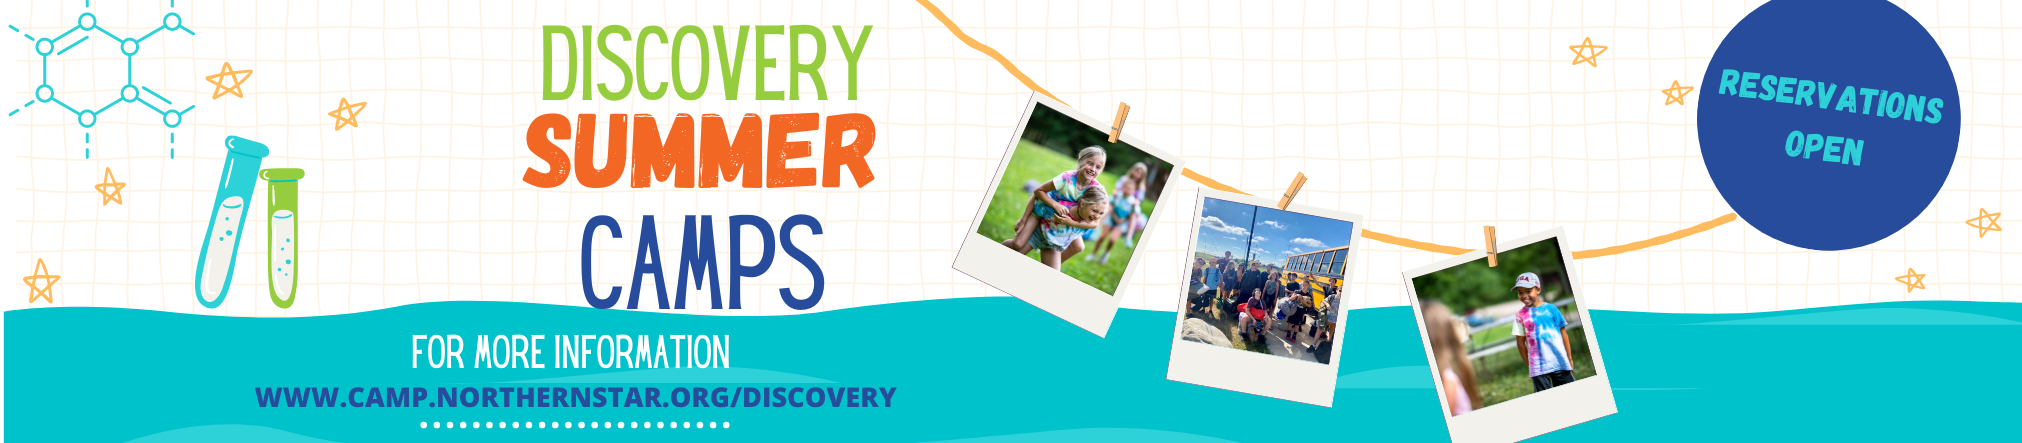 Discovery Summer Camps: Reservations open now. For more information, head to camp.northernstar.org/discovery